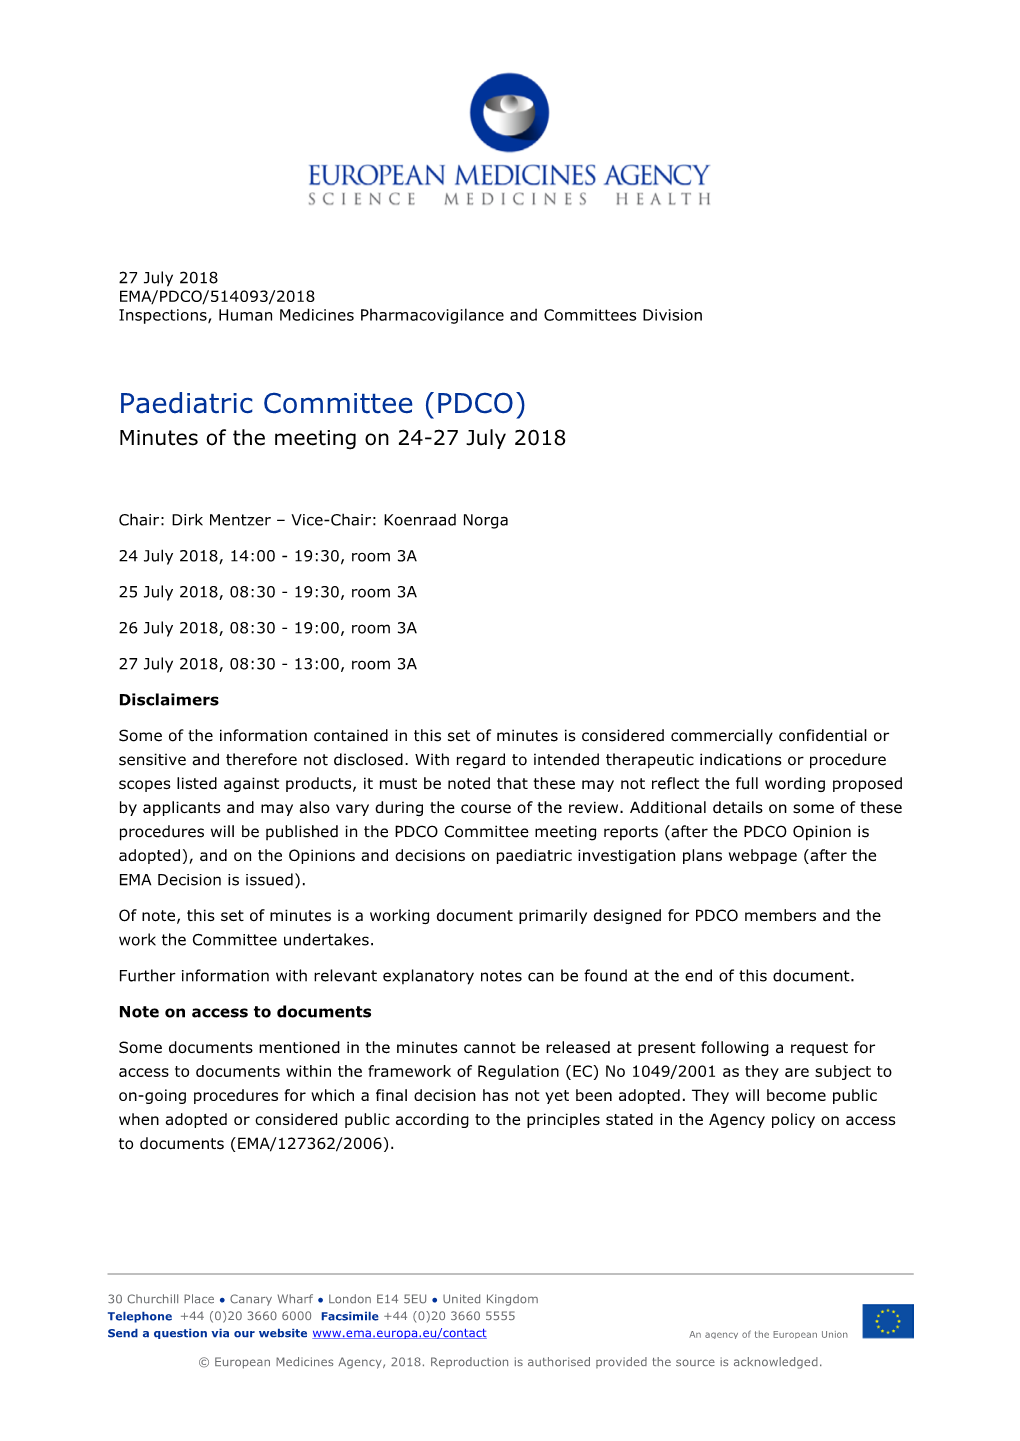 PDCO Minutes of the 24-27 July 2018 Meeting